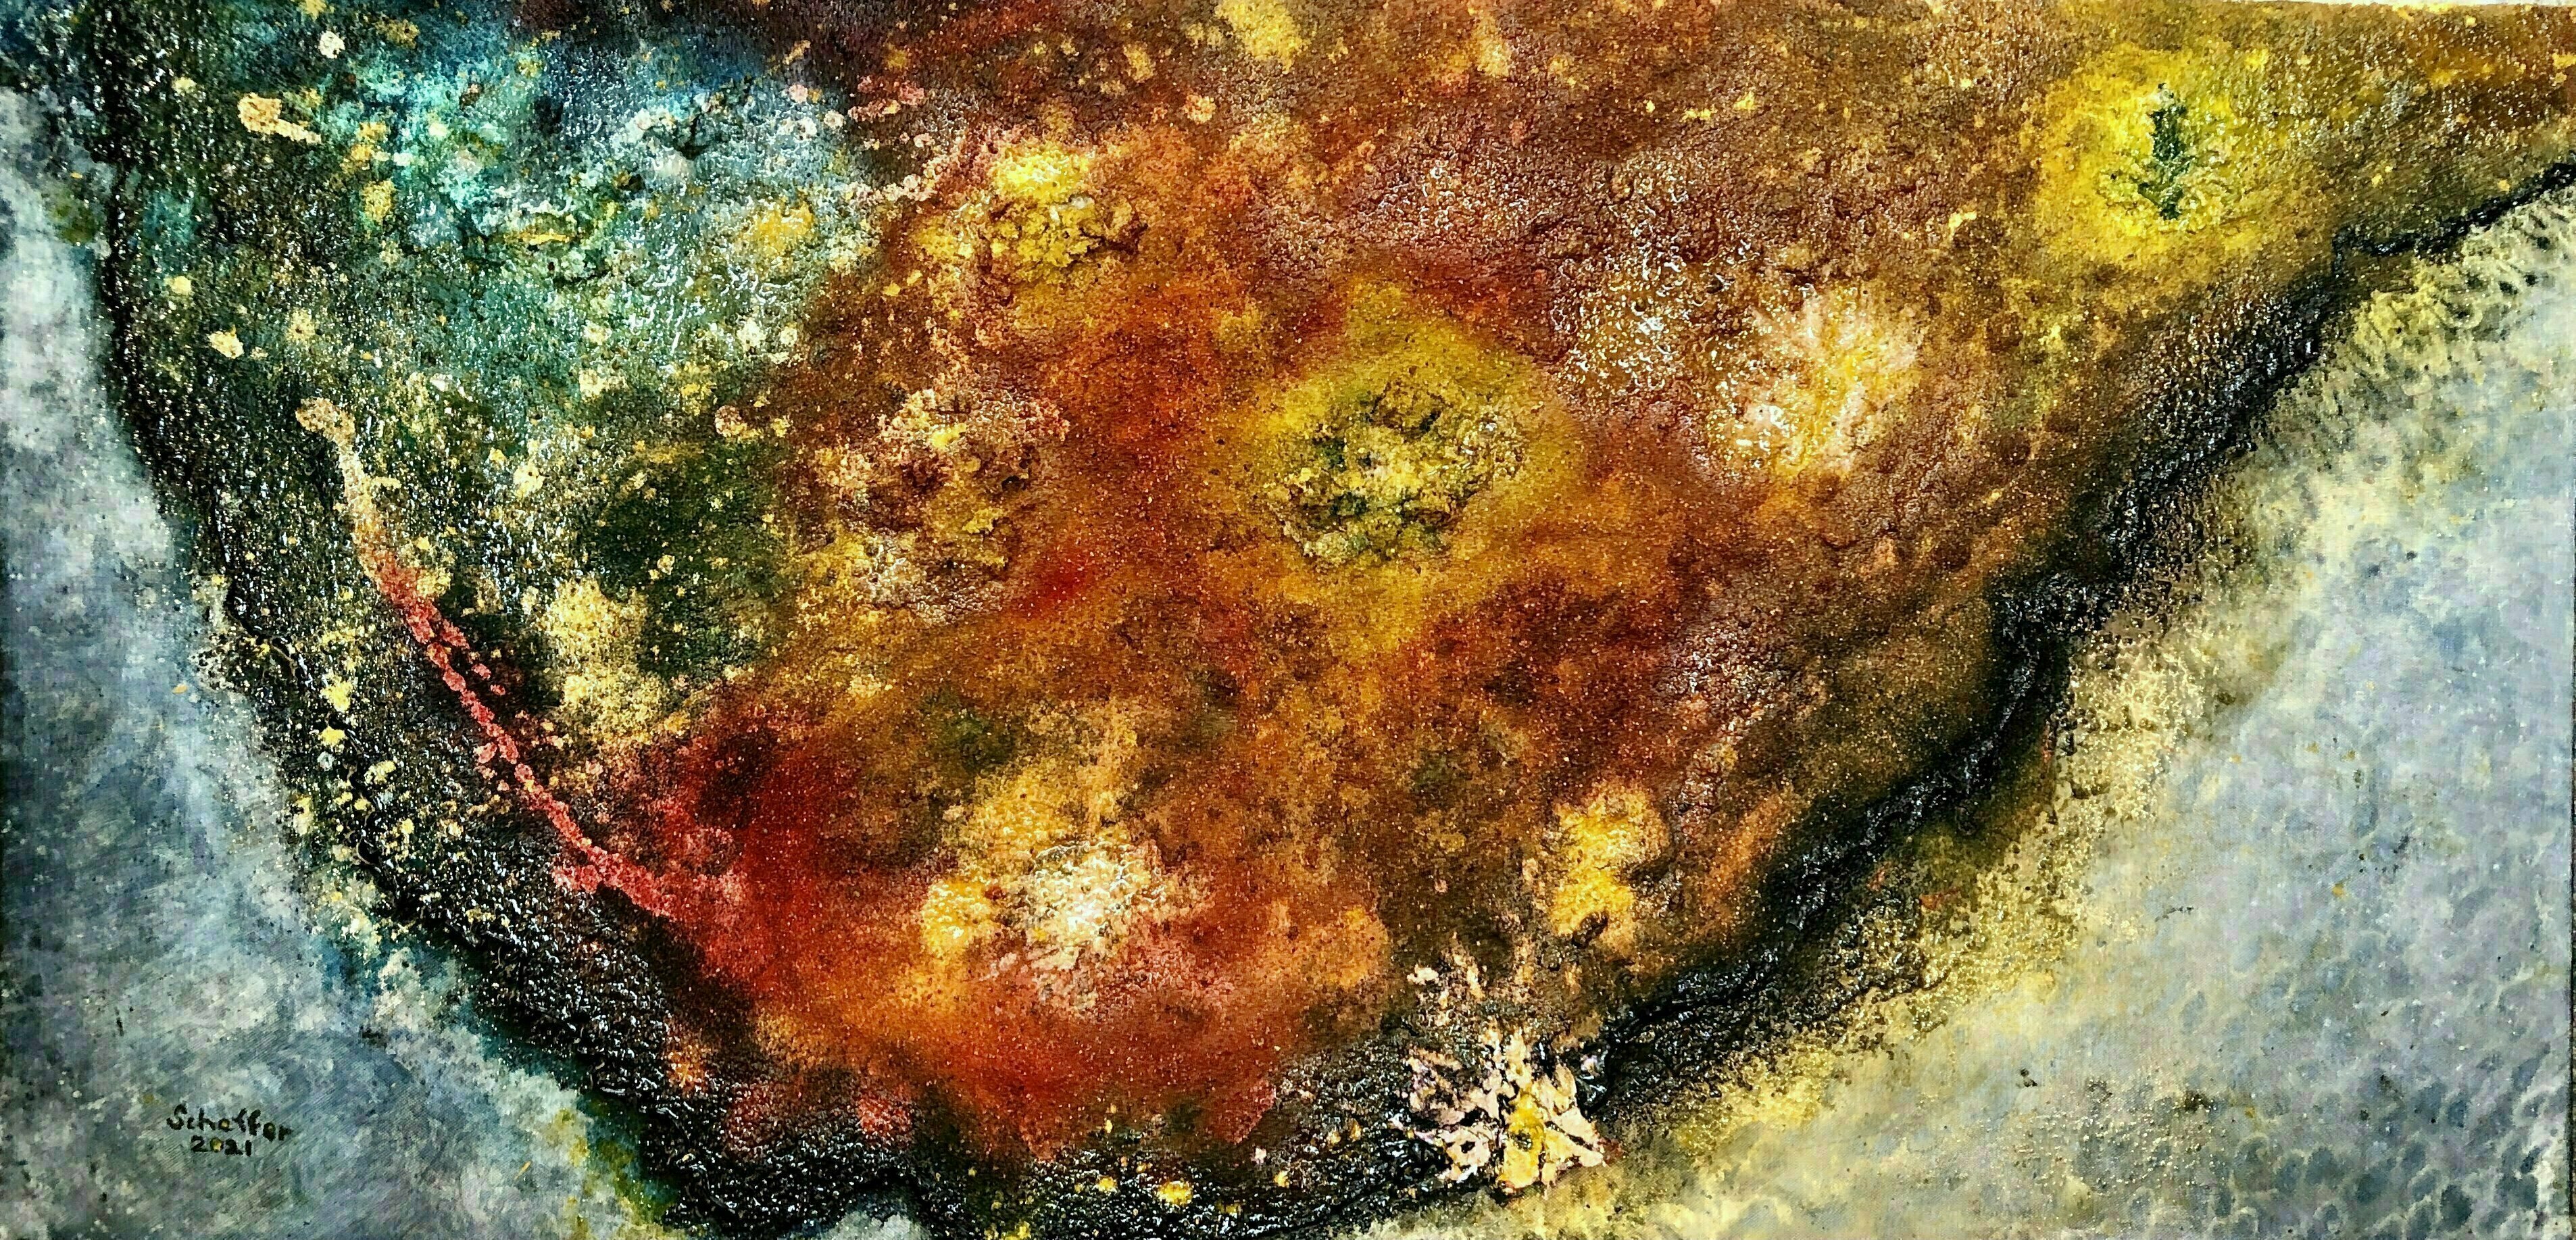 Michael Schaffer; Meteor, 2021, Original Mixed Media, 48 x 24 inches. Artwork description: 241 This colorful abstract uses sand, ocean sponges, pumice rock, inks, and resin.  And it really does feel wild and will look amazing on your wall. ...